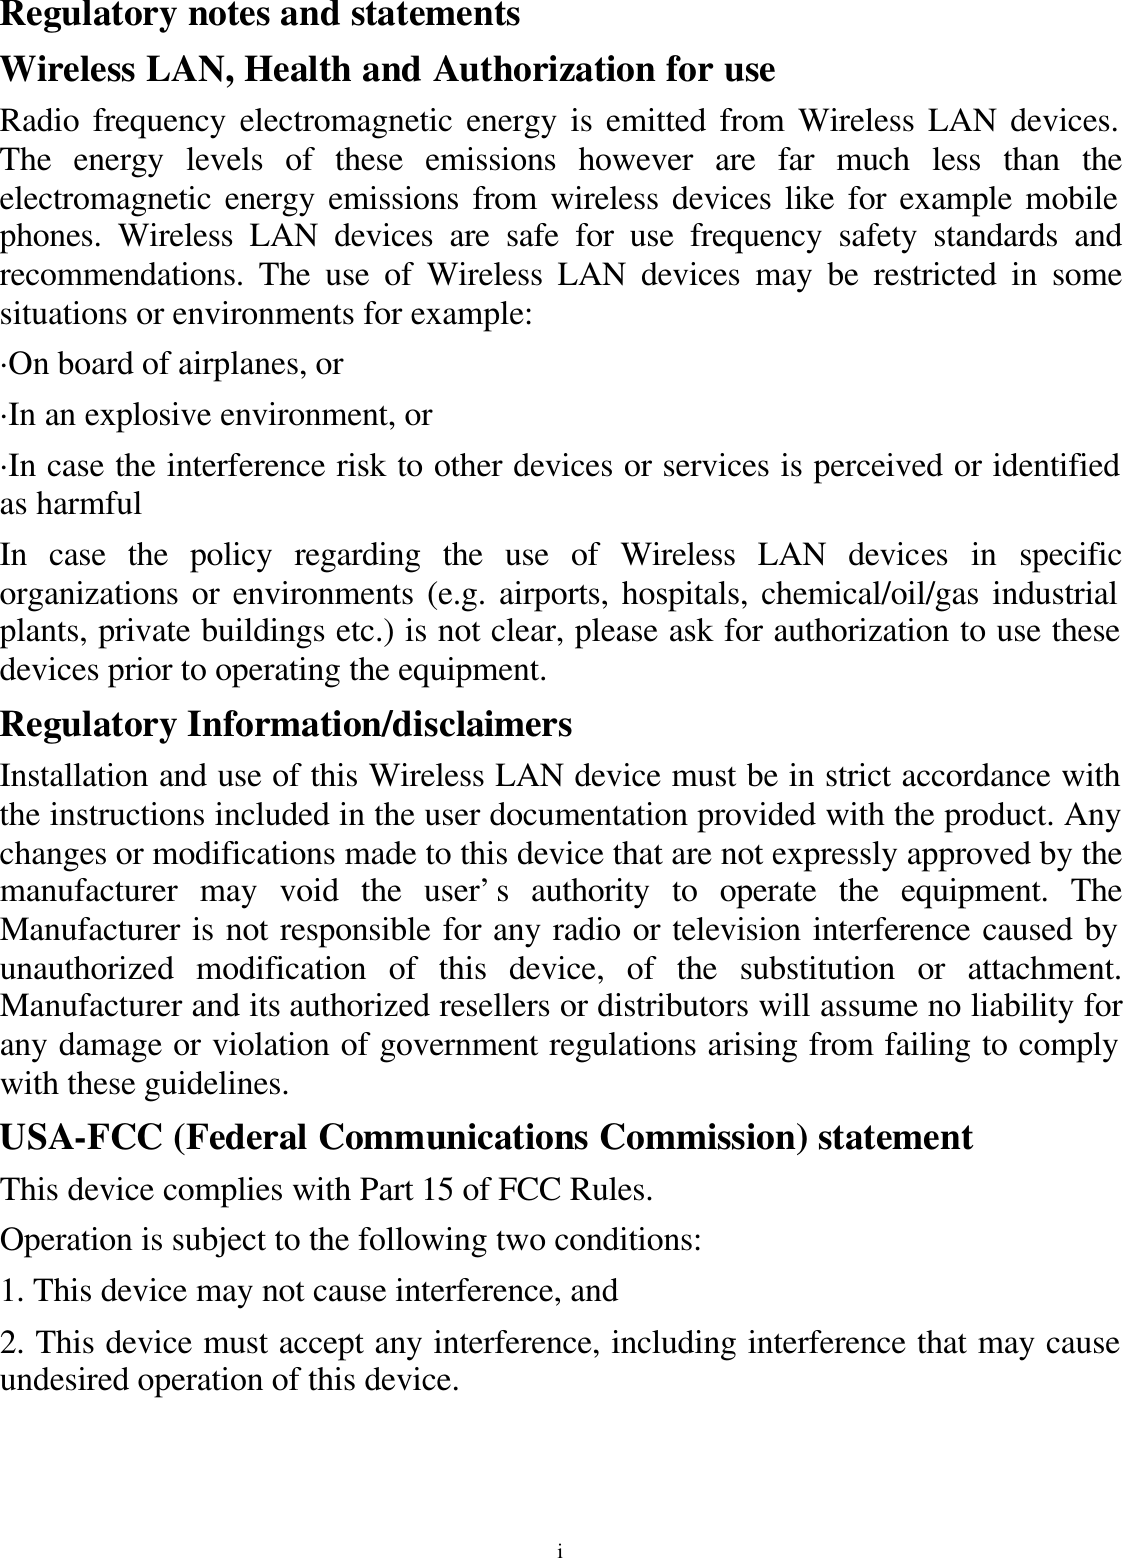 i Regulatory notes and statements Wireless LAN, Health and Authorization for use Radio frequency electromagnetic energy is emitted from Wireless LAN devices. The energy levels of these emissions however are far much less than the electromagnetic energy emissions from wireless devices like for example mobile phones. Wireless LAN devices are safe for use frequency safety standards and recommendations. The use of Wireless LAN devices may be restricted in some situations or environments for example: ·On board of airplanes, or ·In an explosive environment, or ·In case the interference risk to other devices or services is perceived or identified as harmful In case the policy regarding the use of Wireless LAN devices in specific organizations or environments (e.g. airports, hospitals, chemical/oil/gas industrial plants, private buildings etc.) is not clear, please ask for authorization to use these devices prior to operating the equipment. Regulatory Information/disclaimers Installation and use of this Wireless LAN device must be in strict accordance with the instructions included in the user documentation provided with the product. Any changes or modifications made to this device that are not expressly approved by the manufacturer may void the user’s authority to operate the equipment. The Manufacturer is not responsible for any radio or television interference caused by unauthorized modification of this device, of the substitution or attachment. Manufacturer and its authorized resellers or distributors will assume no liability for any damage or violation of government regulations arising from failing to comply with these guidelines. USA-FCC (Federal Communications Commission) statement This device complies with Part 15 of FCC Rules. Operation is subject to the following two conditions: 1. This device may not cause interference, and 2. This device must accept any interference, including interference that may cause undesired operation of this device. 